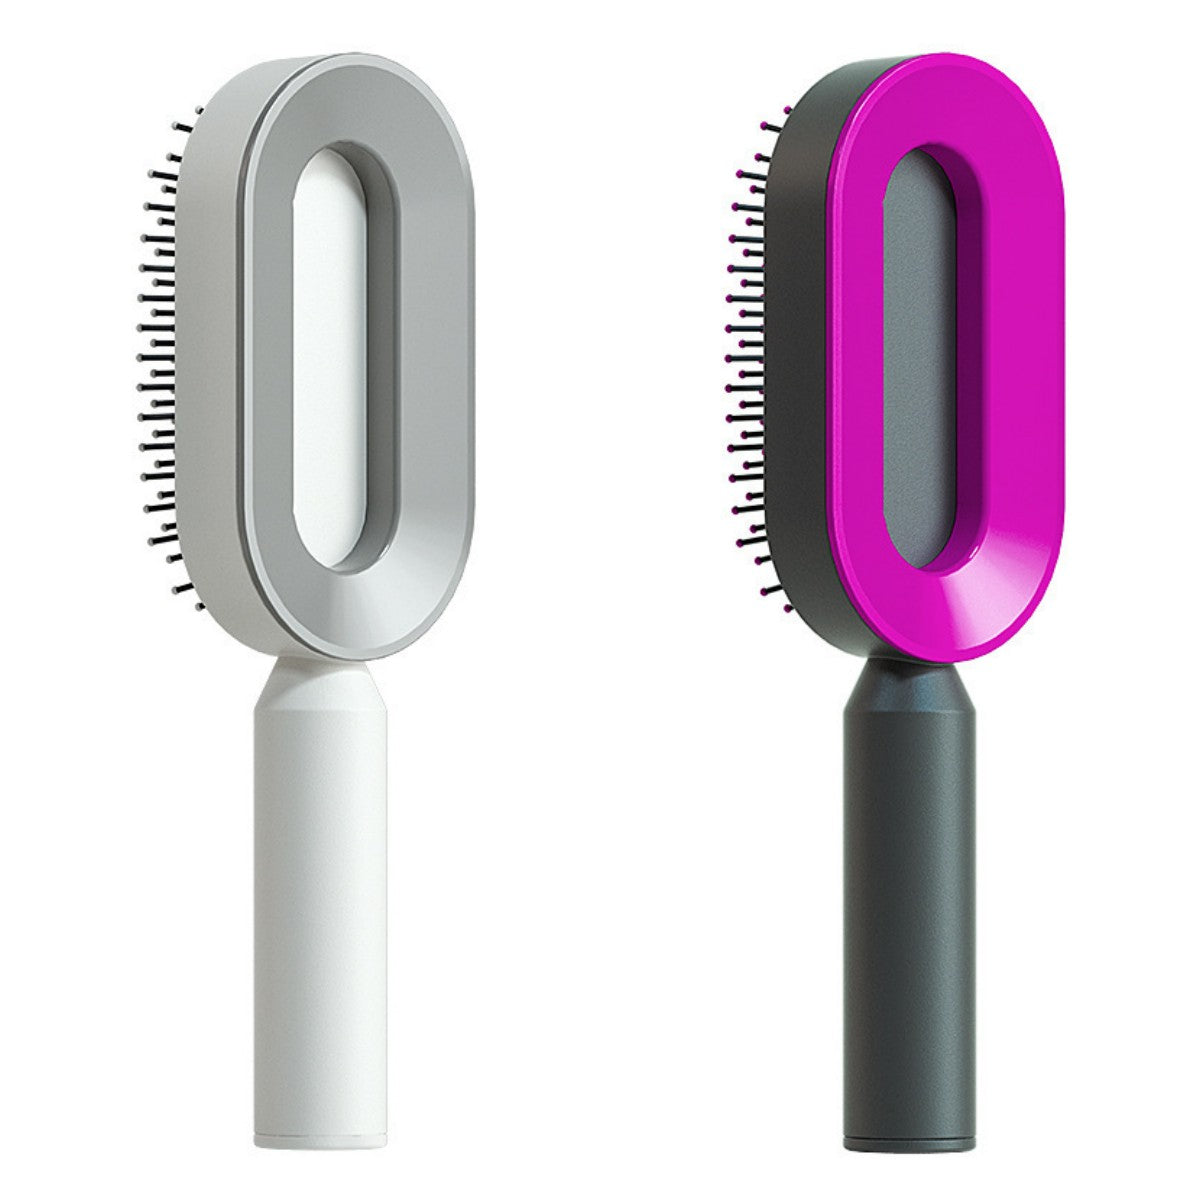 Self Cleaning Hair Brush For Women One-key Cleaning Hair Loss Airbag Massage Scalp Comb Anti-Static Hairbrush Set P